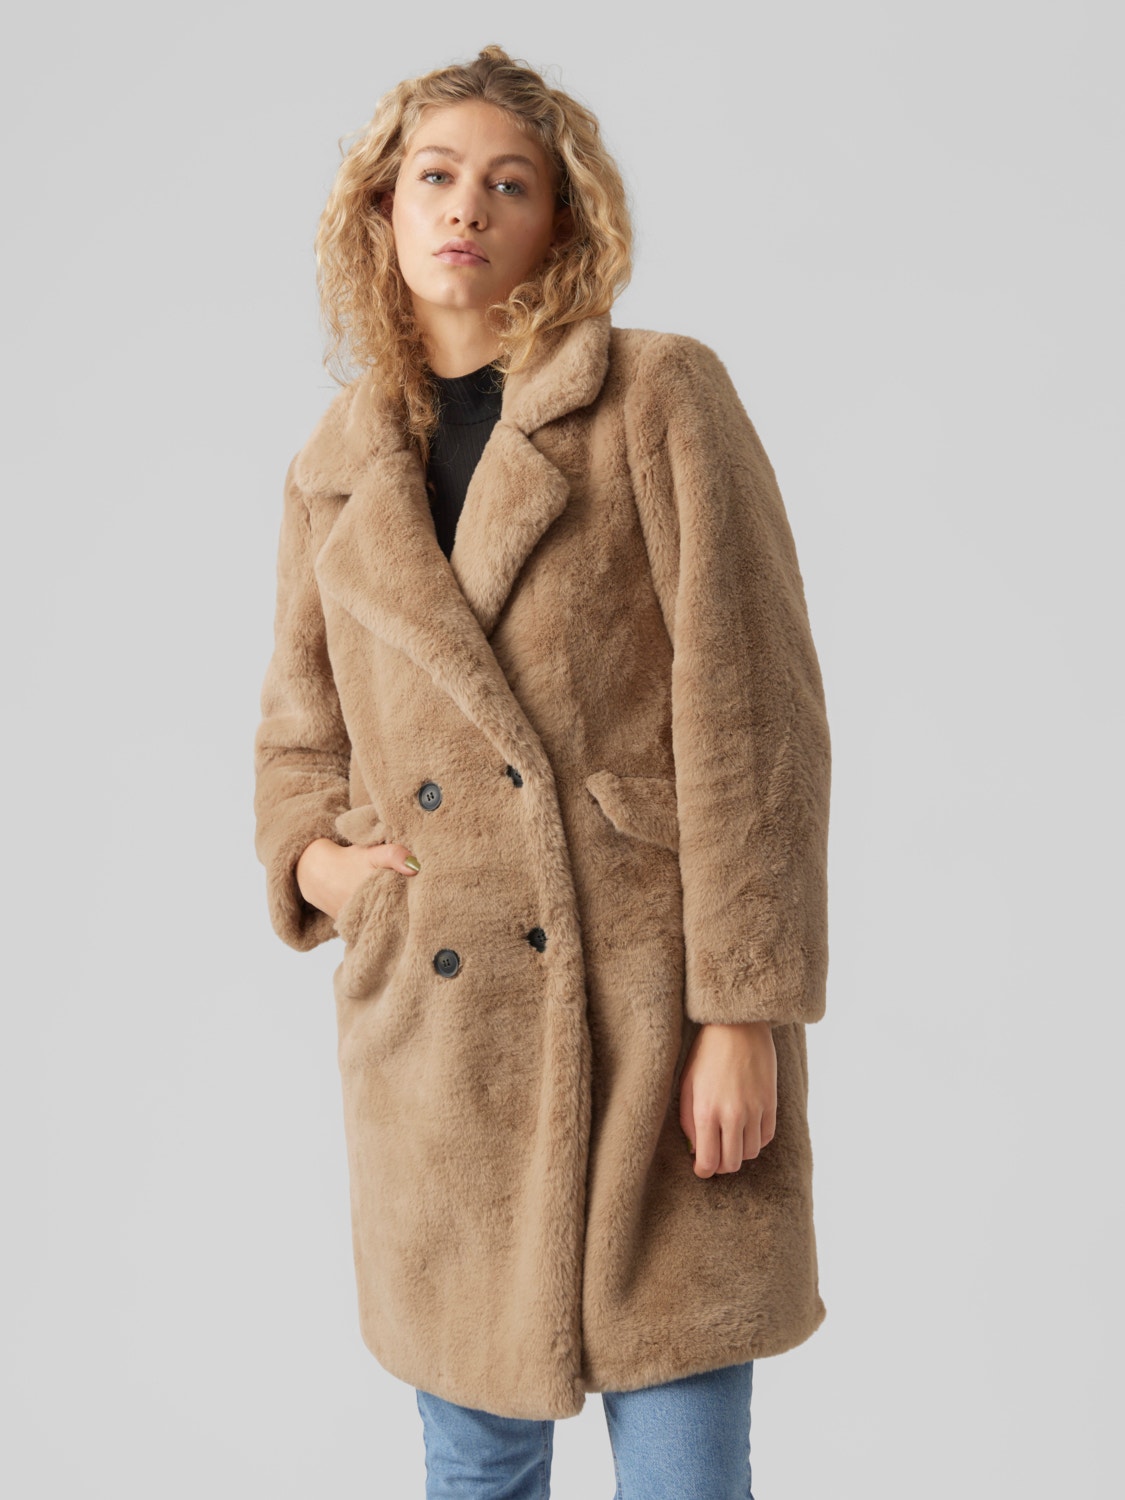 VMSUIELLY Coat with 25% discount!